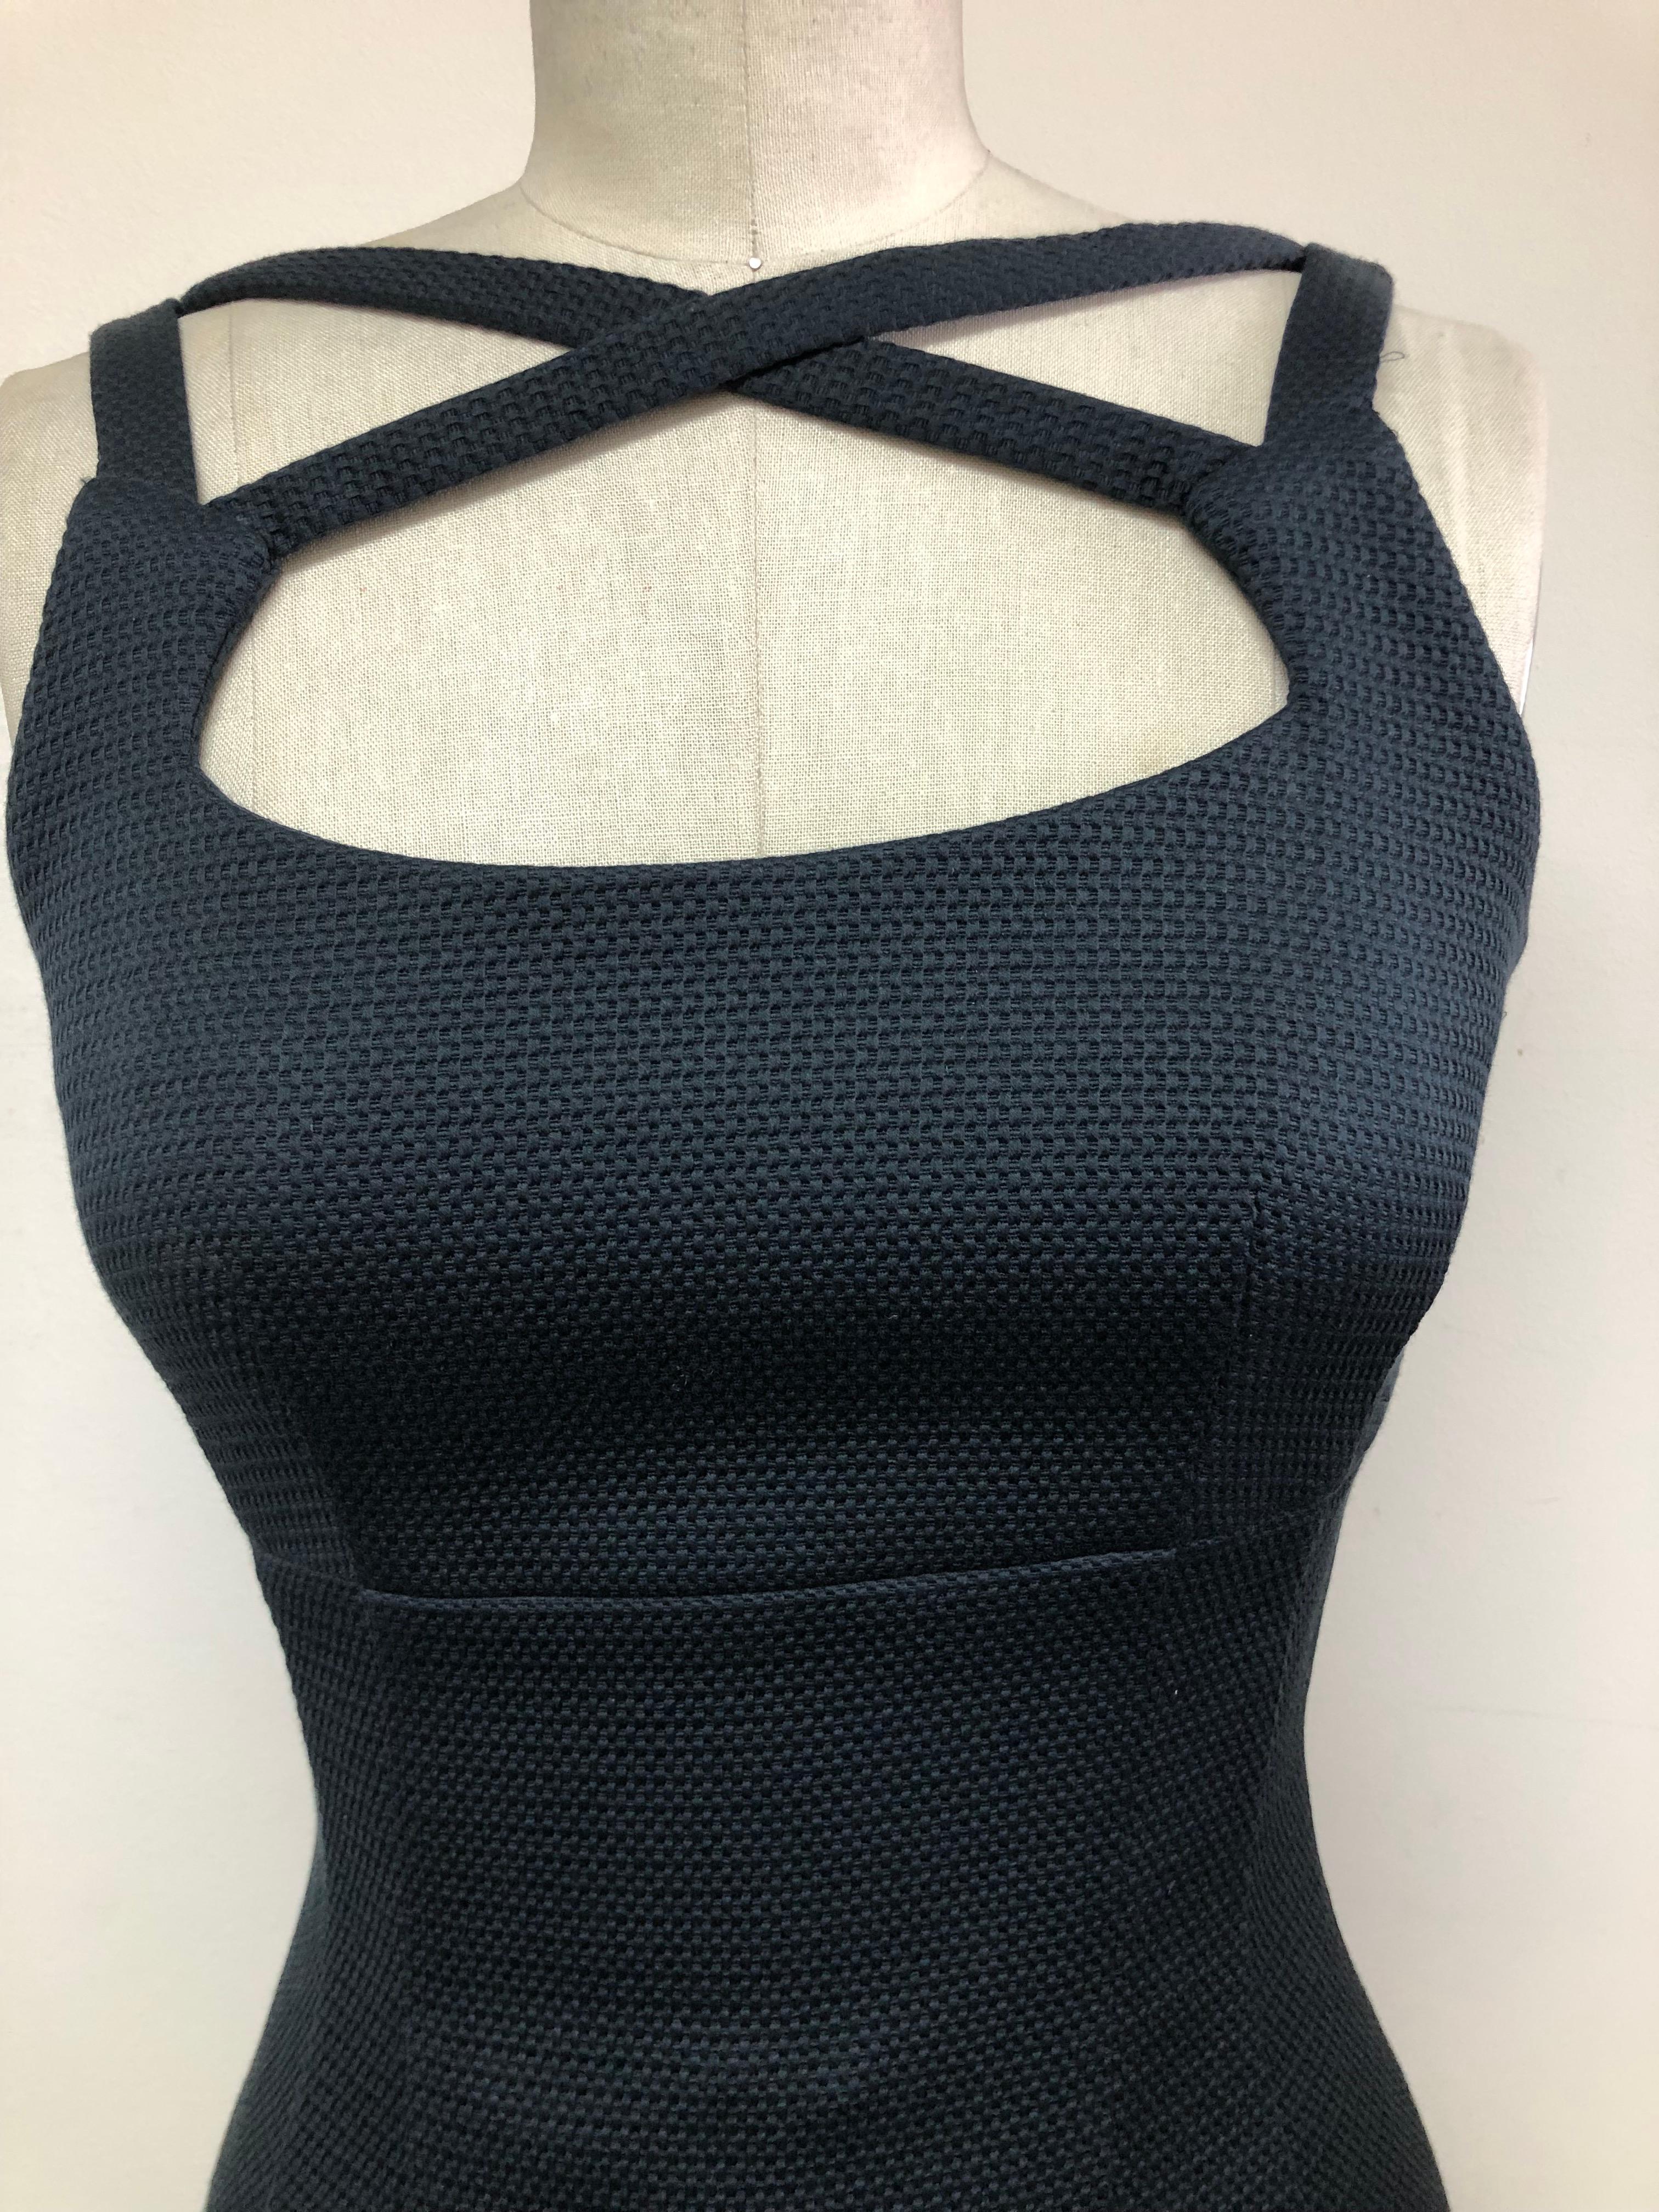 Black Cris Cross Swiss Cotton Stretch Pique Slim Dress In Excellent Condition For Sale In Los Angeles, CA